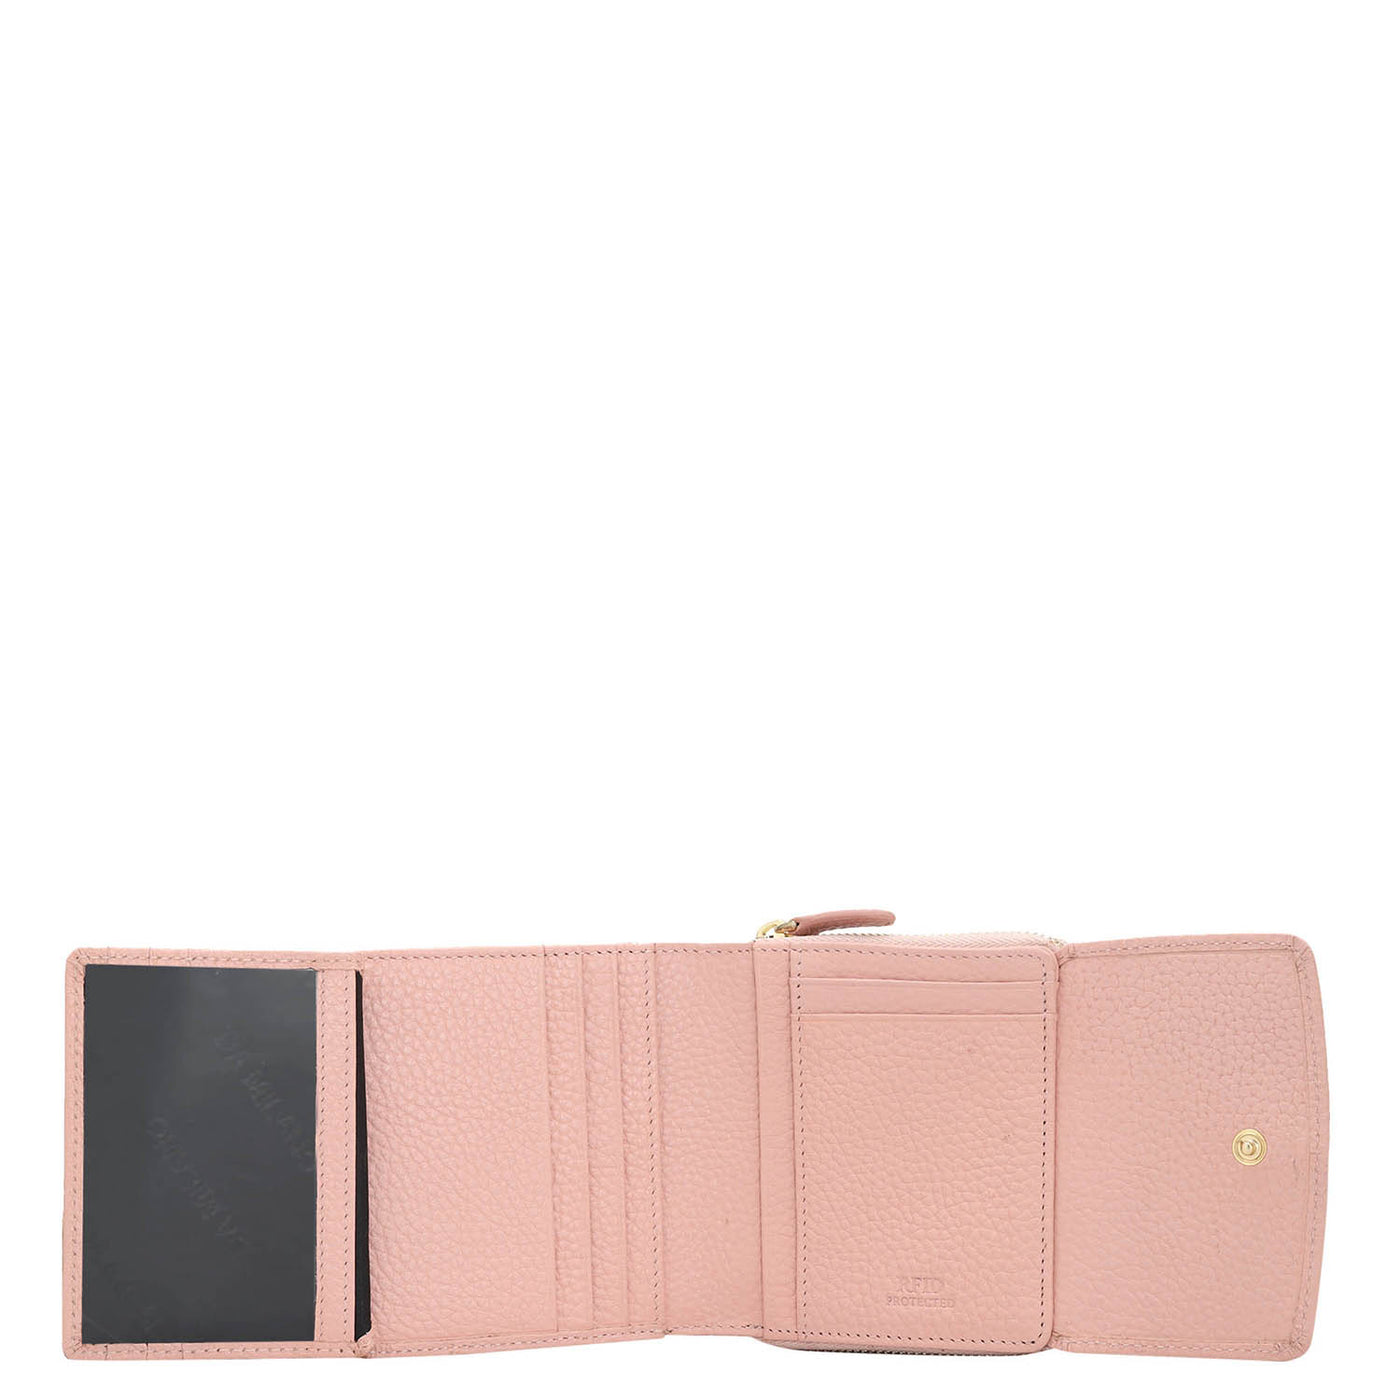 Wax Leather Ladies Wallet - Baby Pink